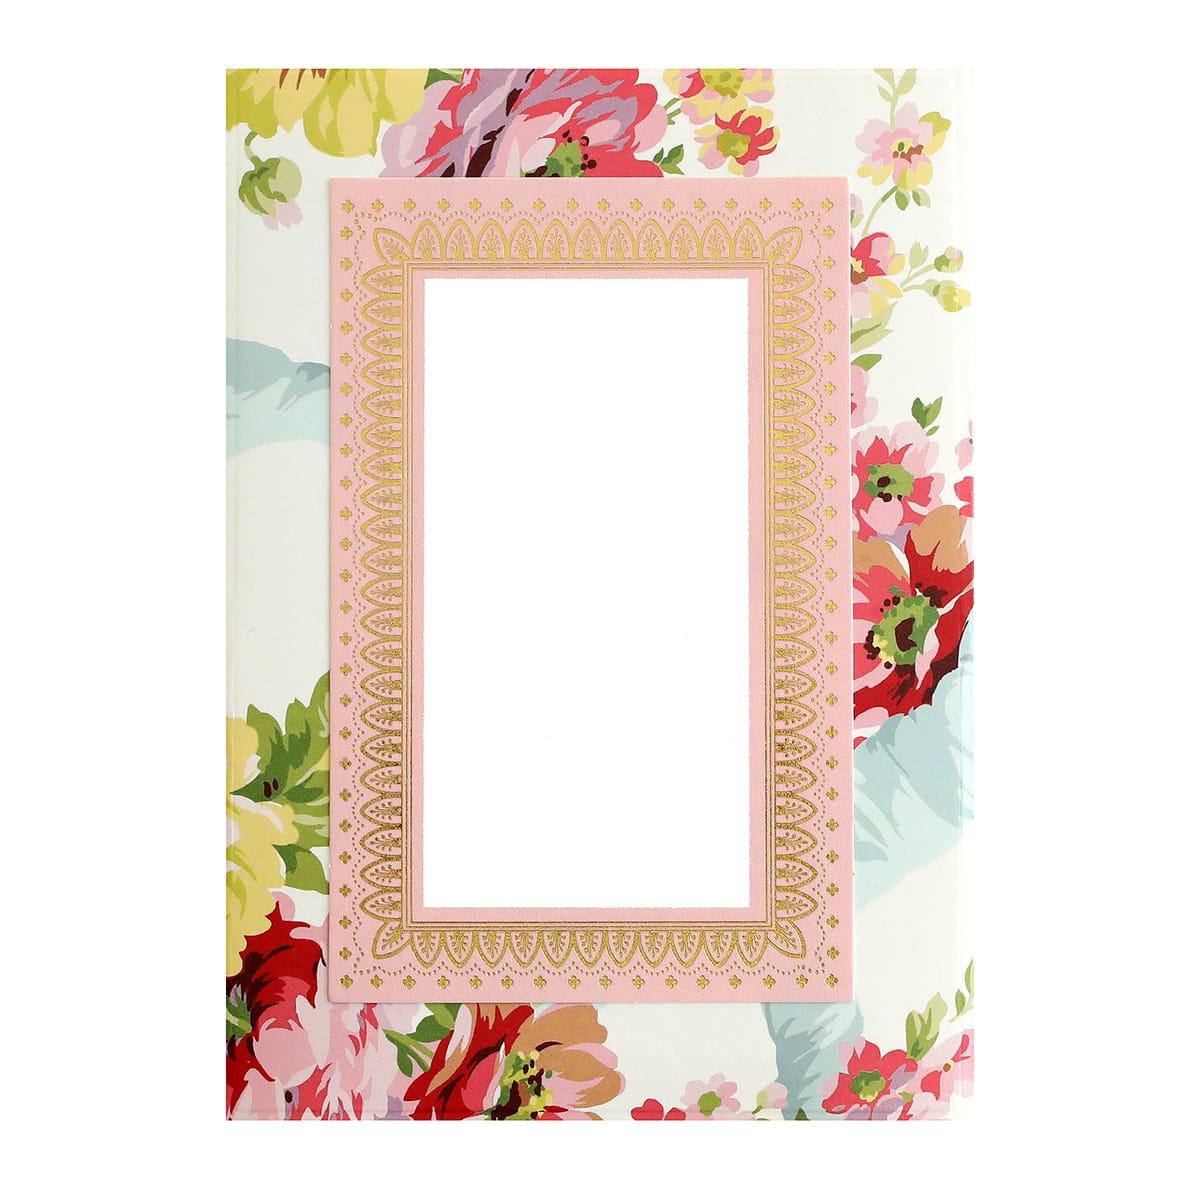 a picture frame with flowers on a white background.